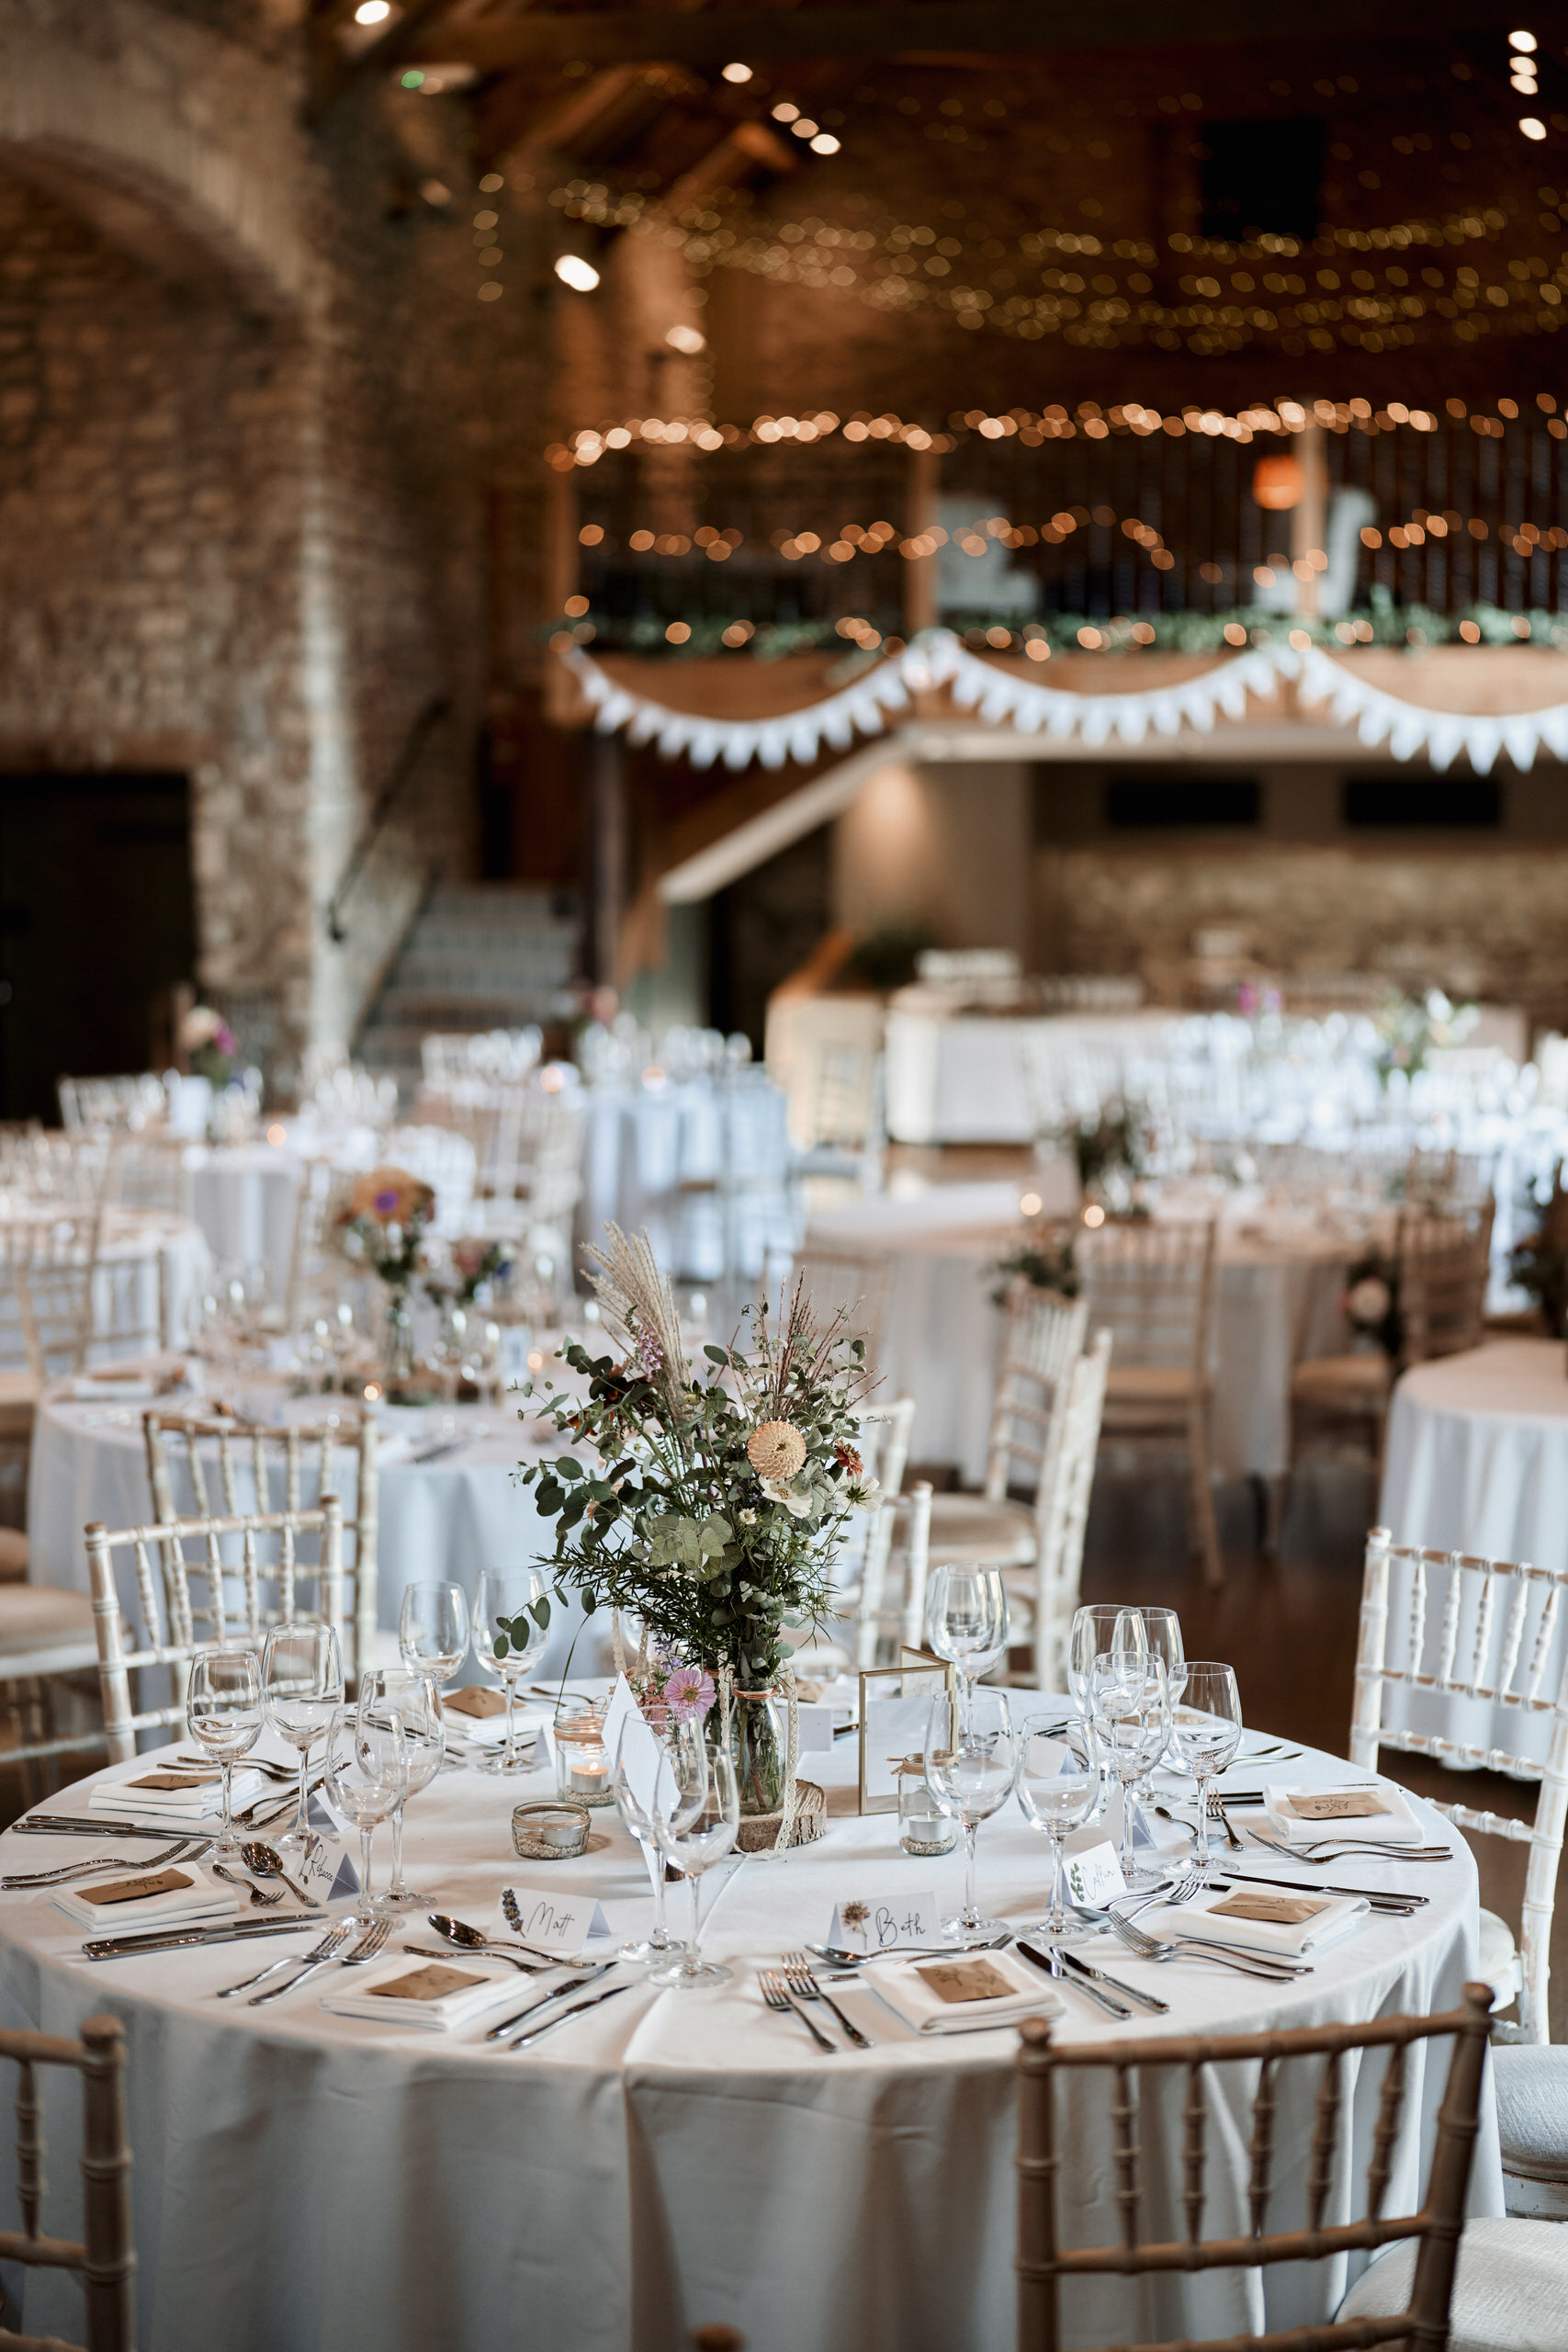 A barn party after a wedding with white tables and chairs.